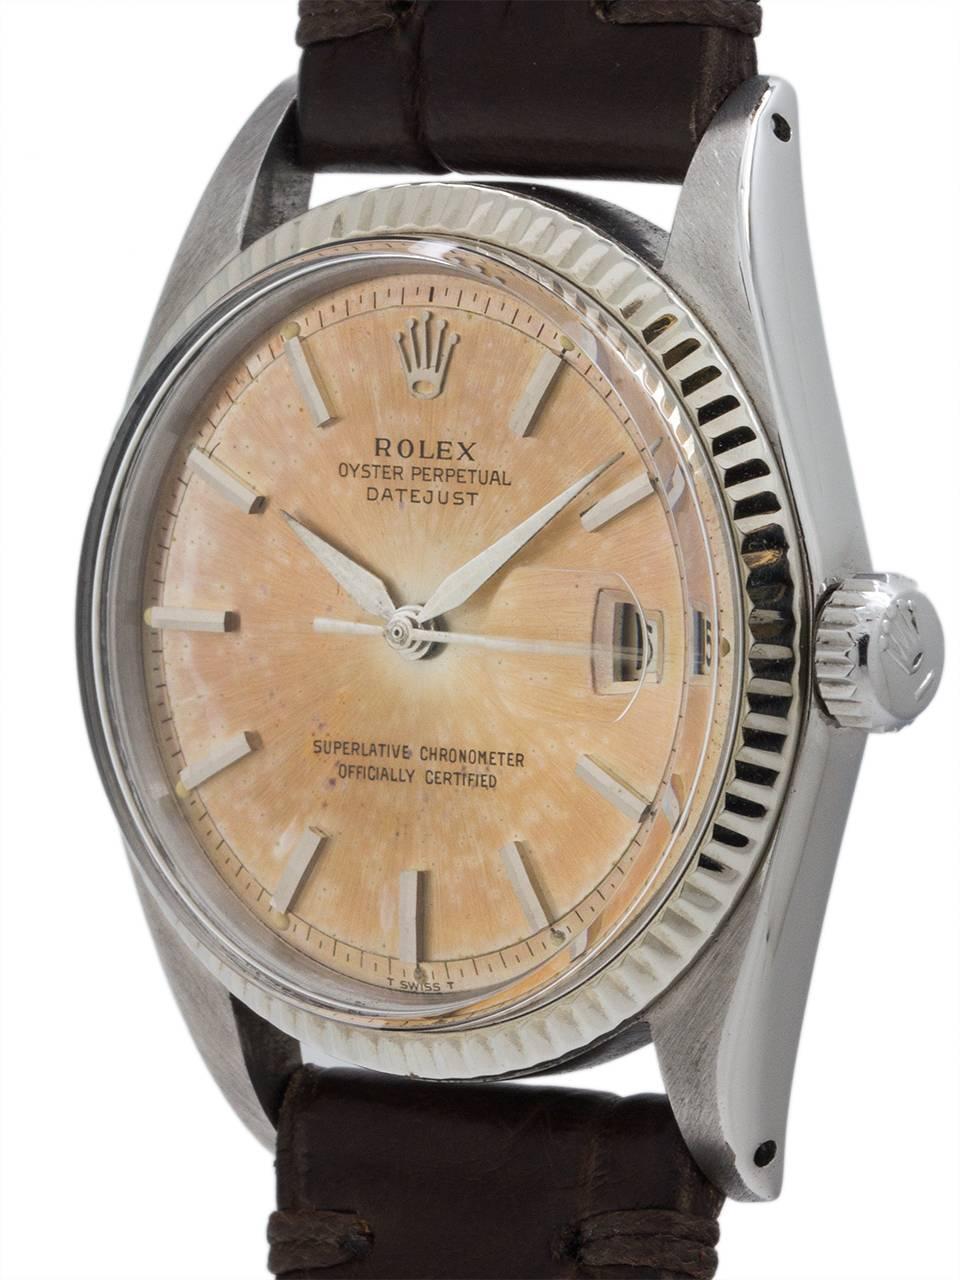 Rolex Stainless Steel Datejust ref 1601 serial # 9.3 million circa 1963. Full size man’s 36mm diameter case with 14K white gold fluted bezel and acrylic crystal with a very pleasing tropical dial with early style tapered hands. The original silver